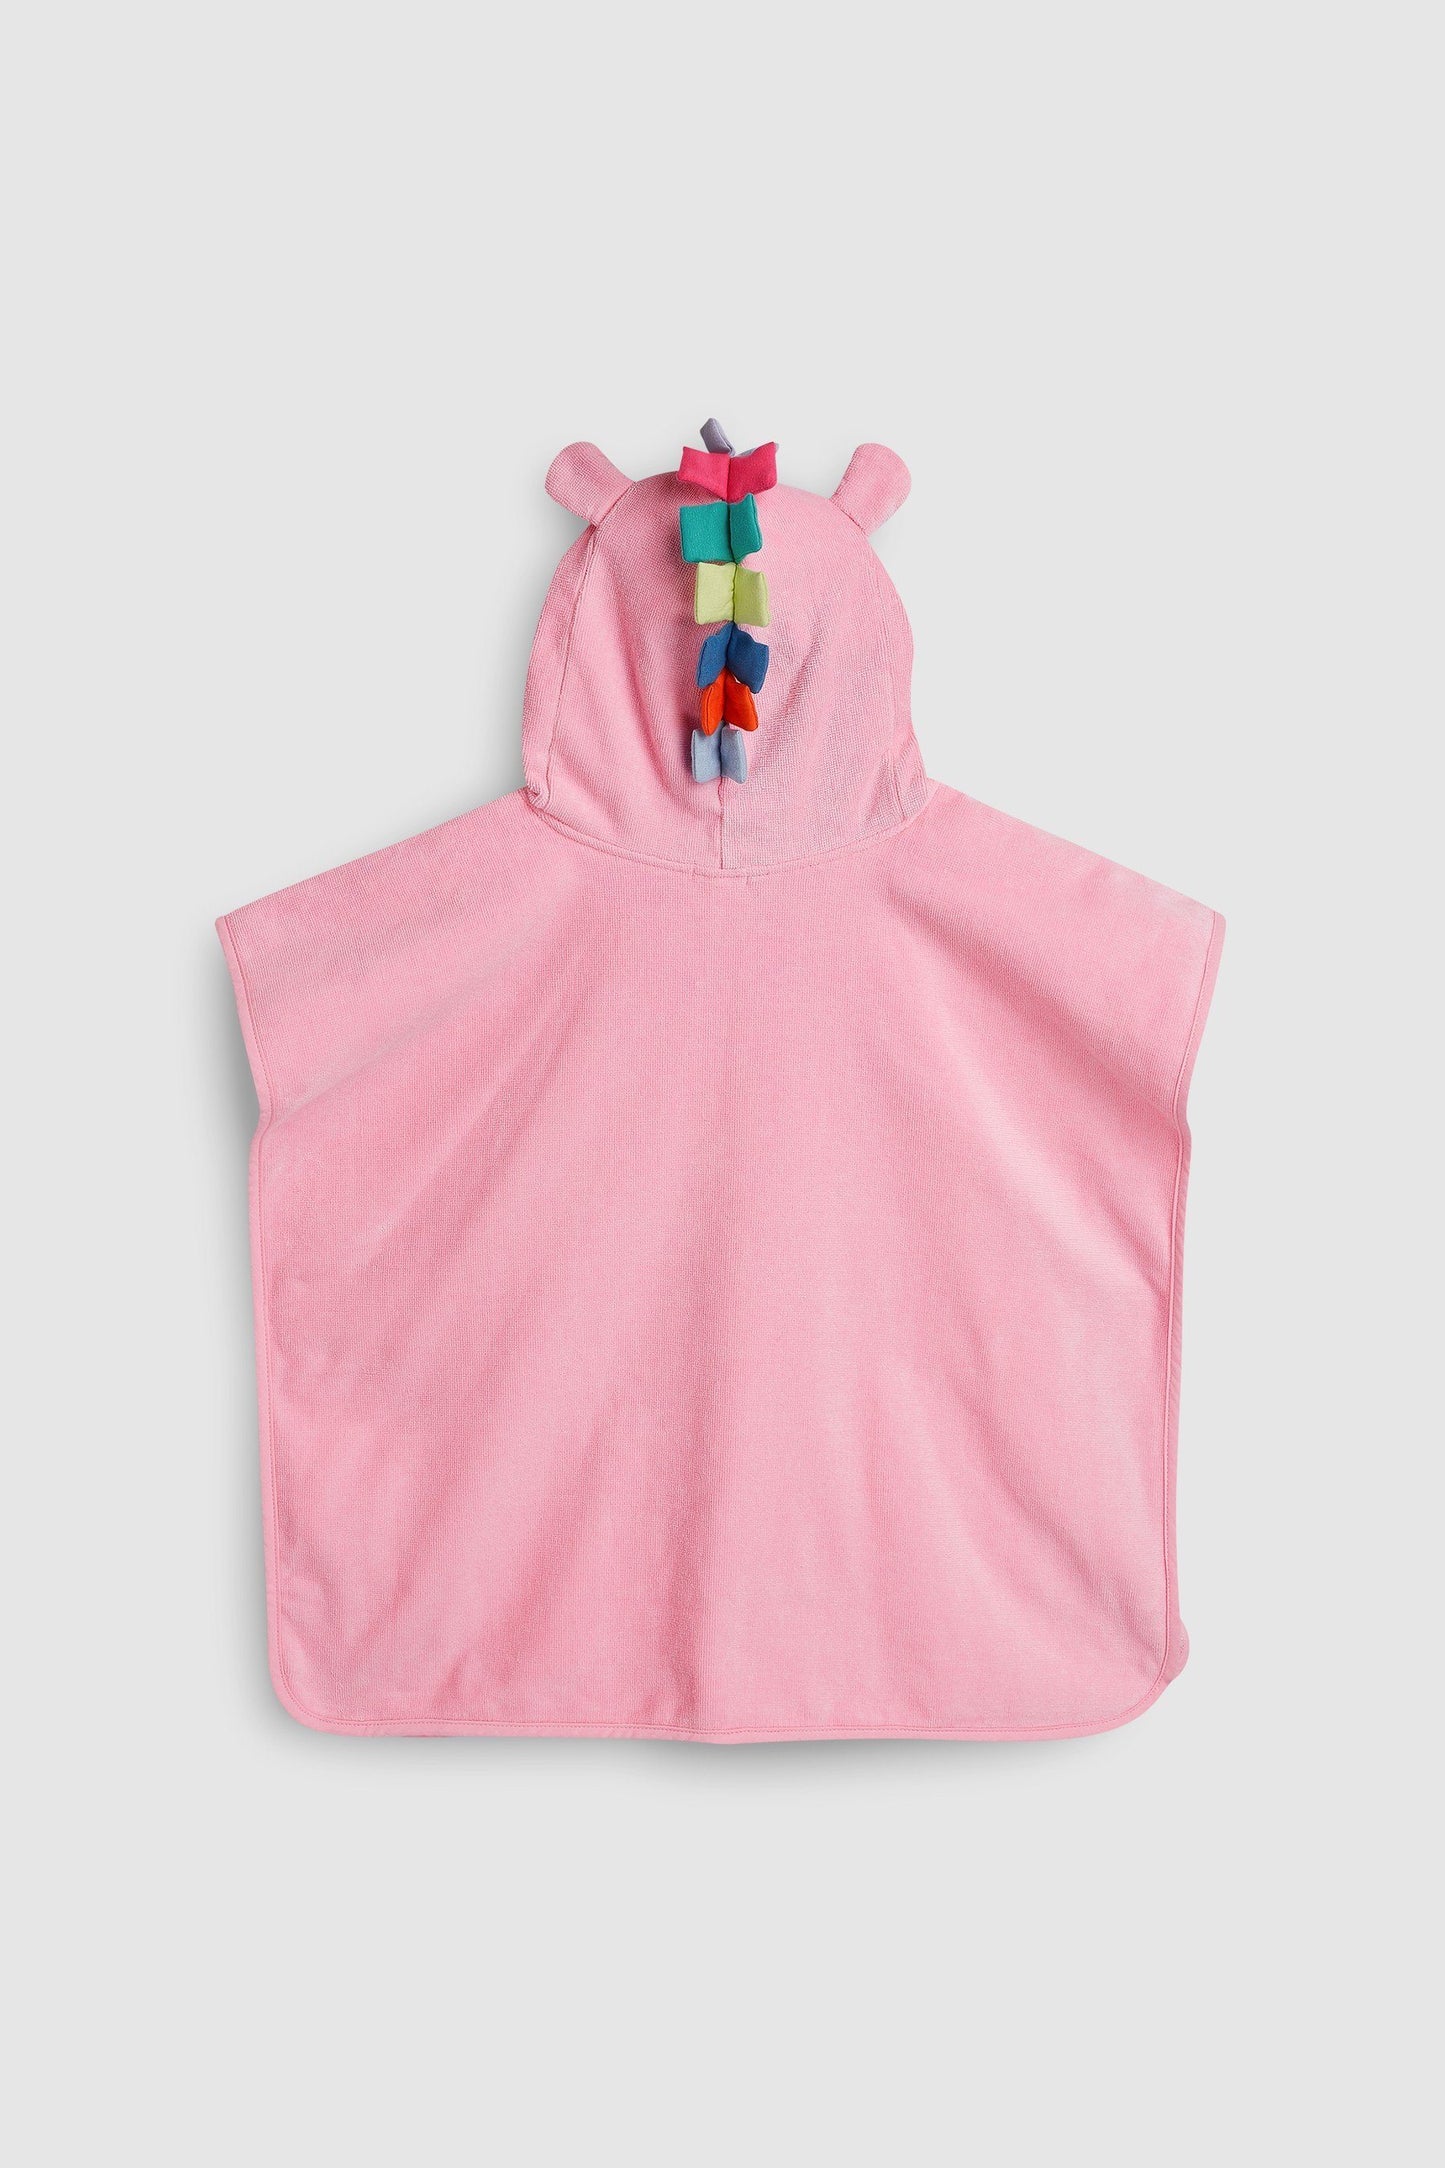 NEXT - Toalha Poncho ROUPA Anne Claire Baby Store 